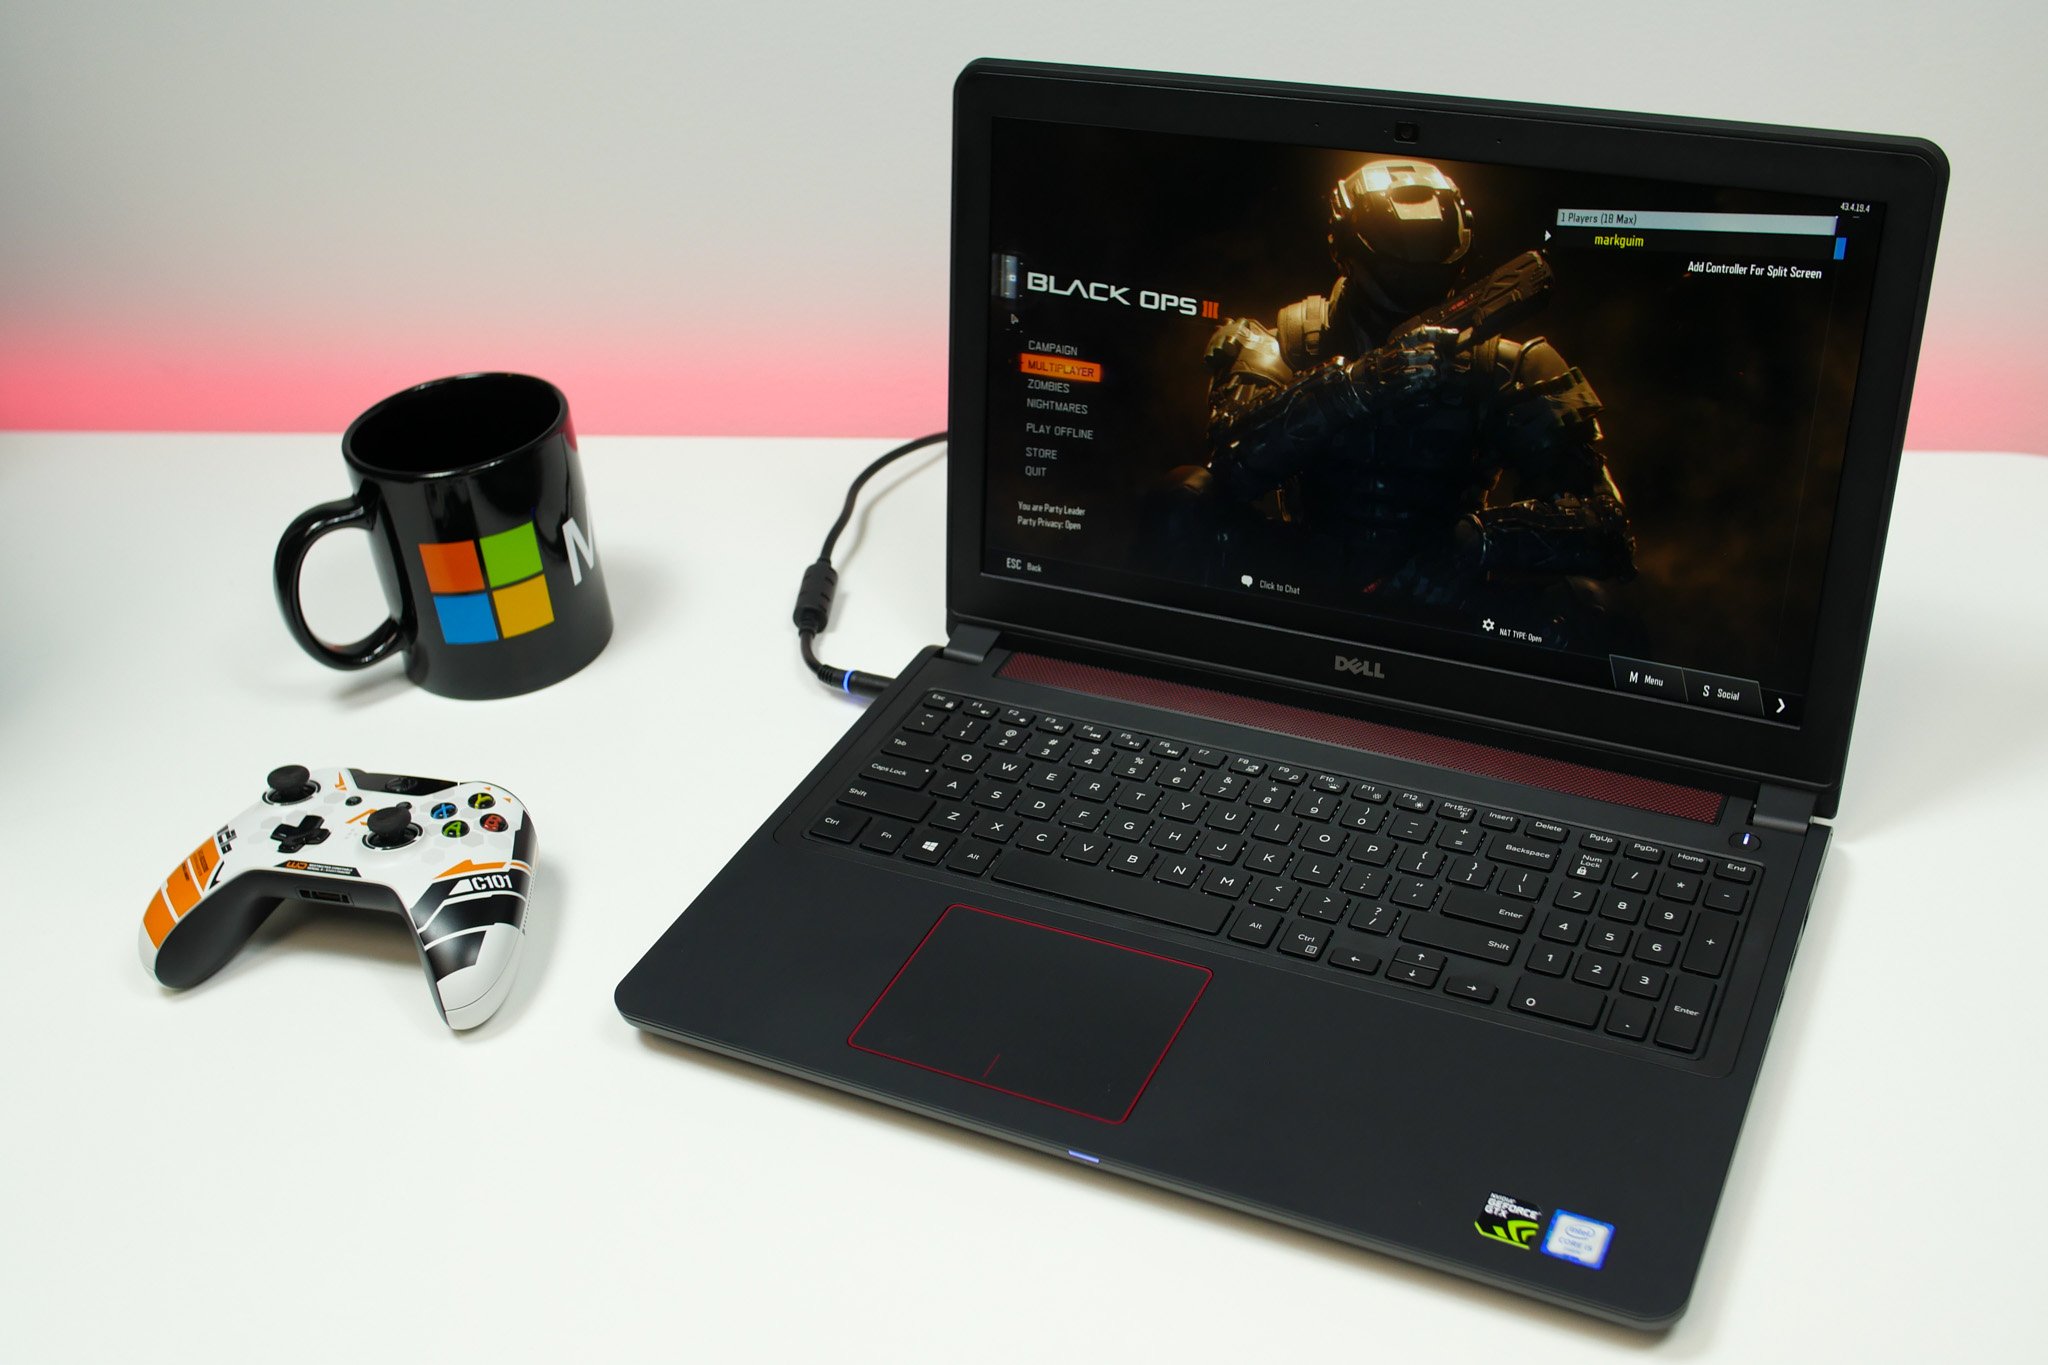 Dell Inspiron 15 7559 review: a solid gaming laptop for ...